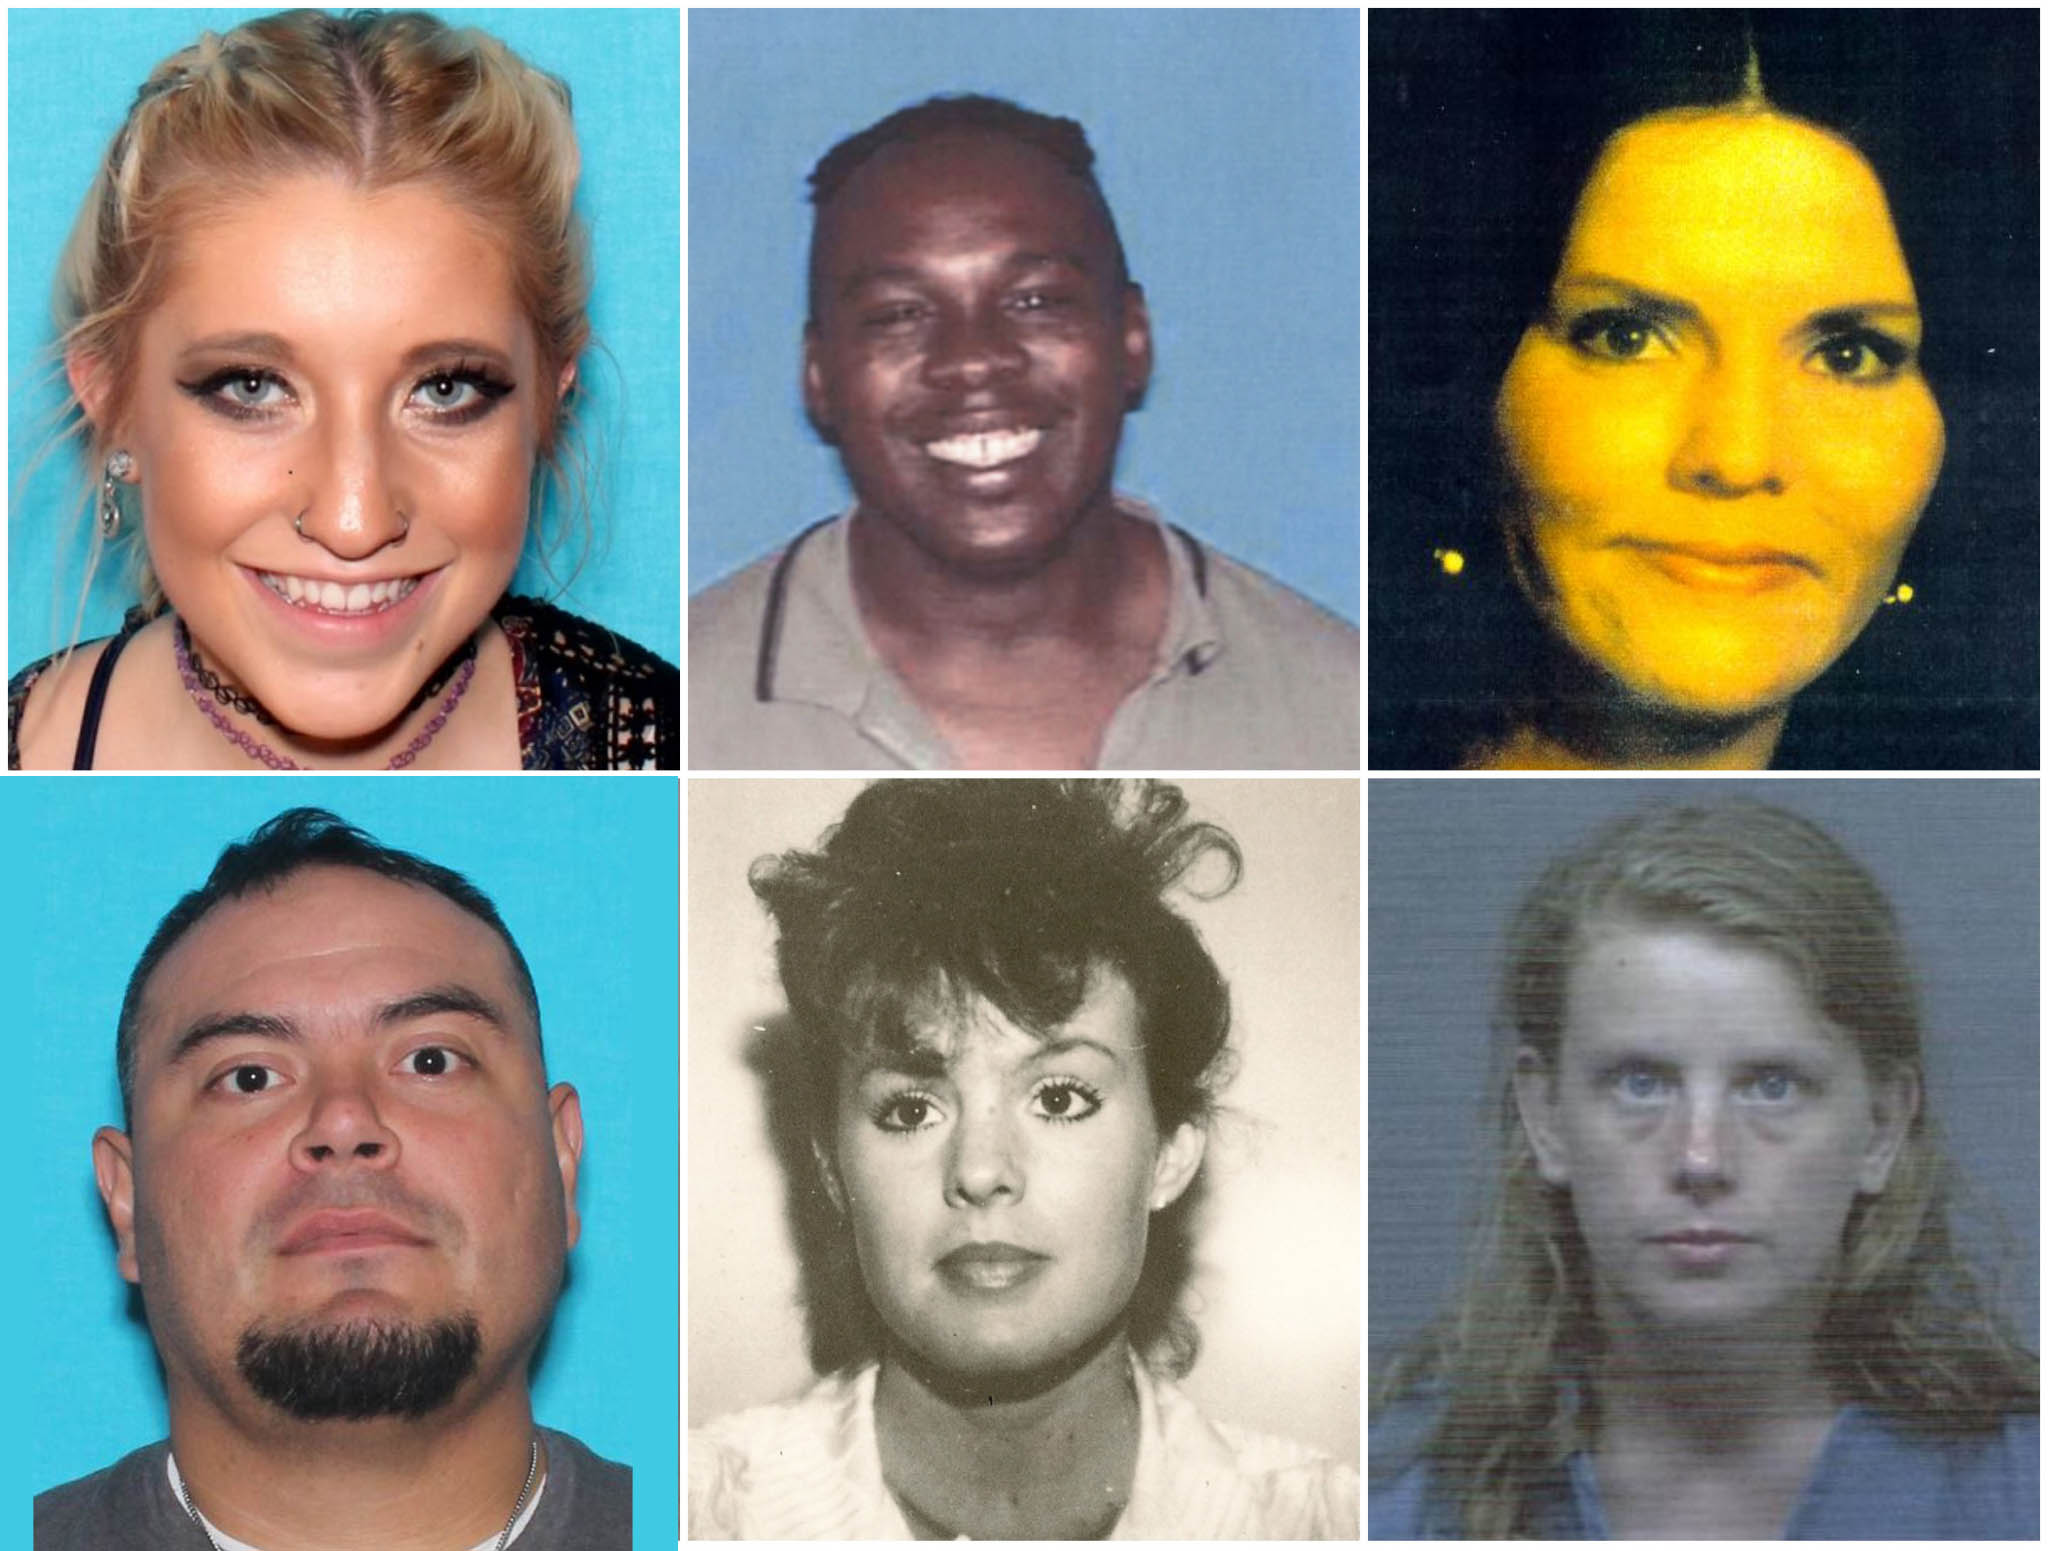 These 12 missing people were last seen in Midland, Odessa pic